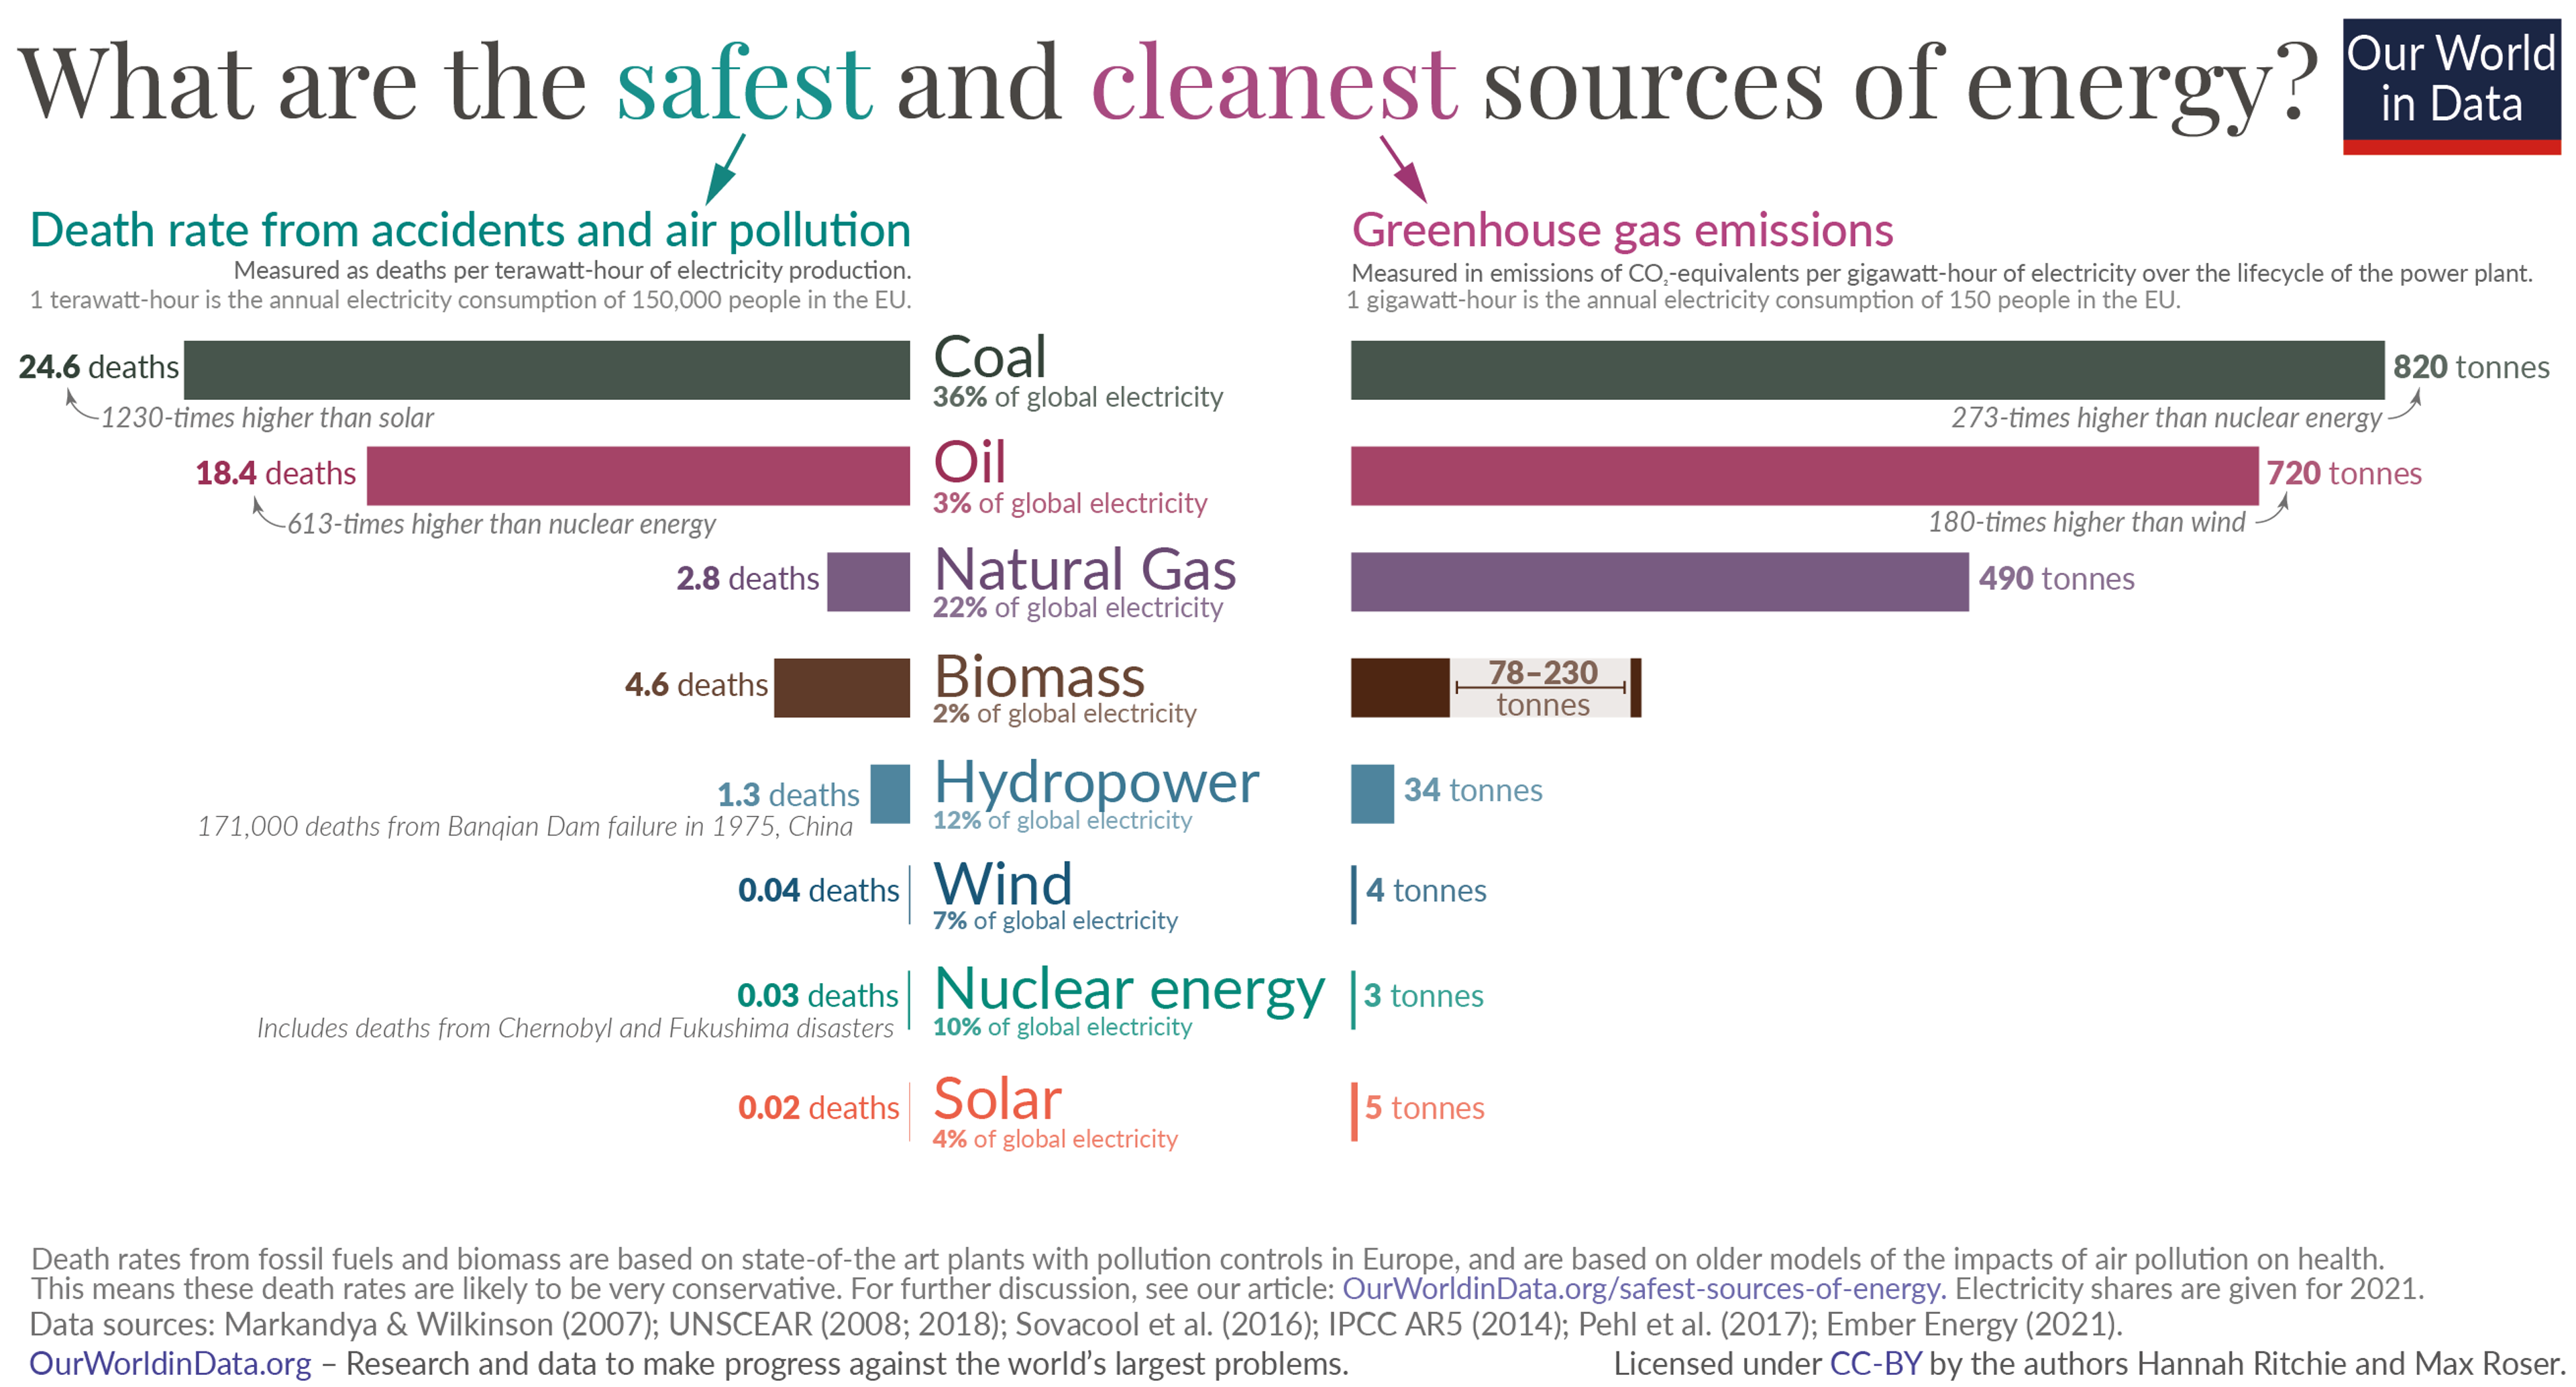 Bar chart comparing energy sources by safety and emissions, showing coal is the worst on both factors, followed by oil.